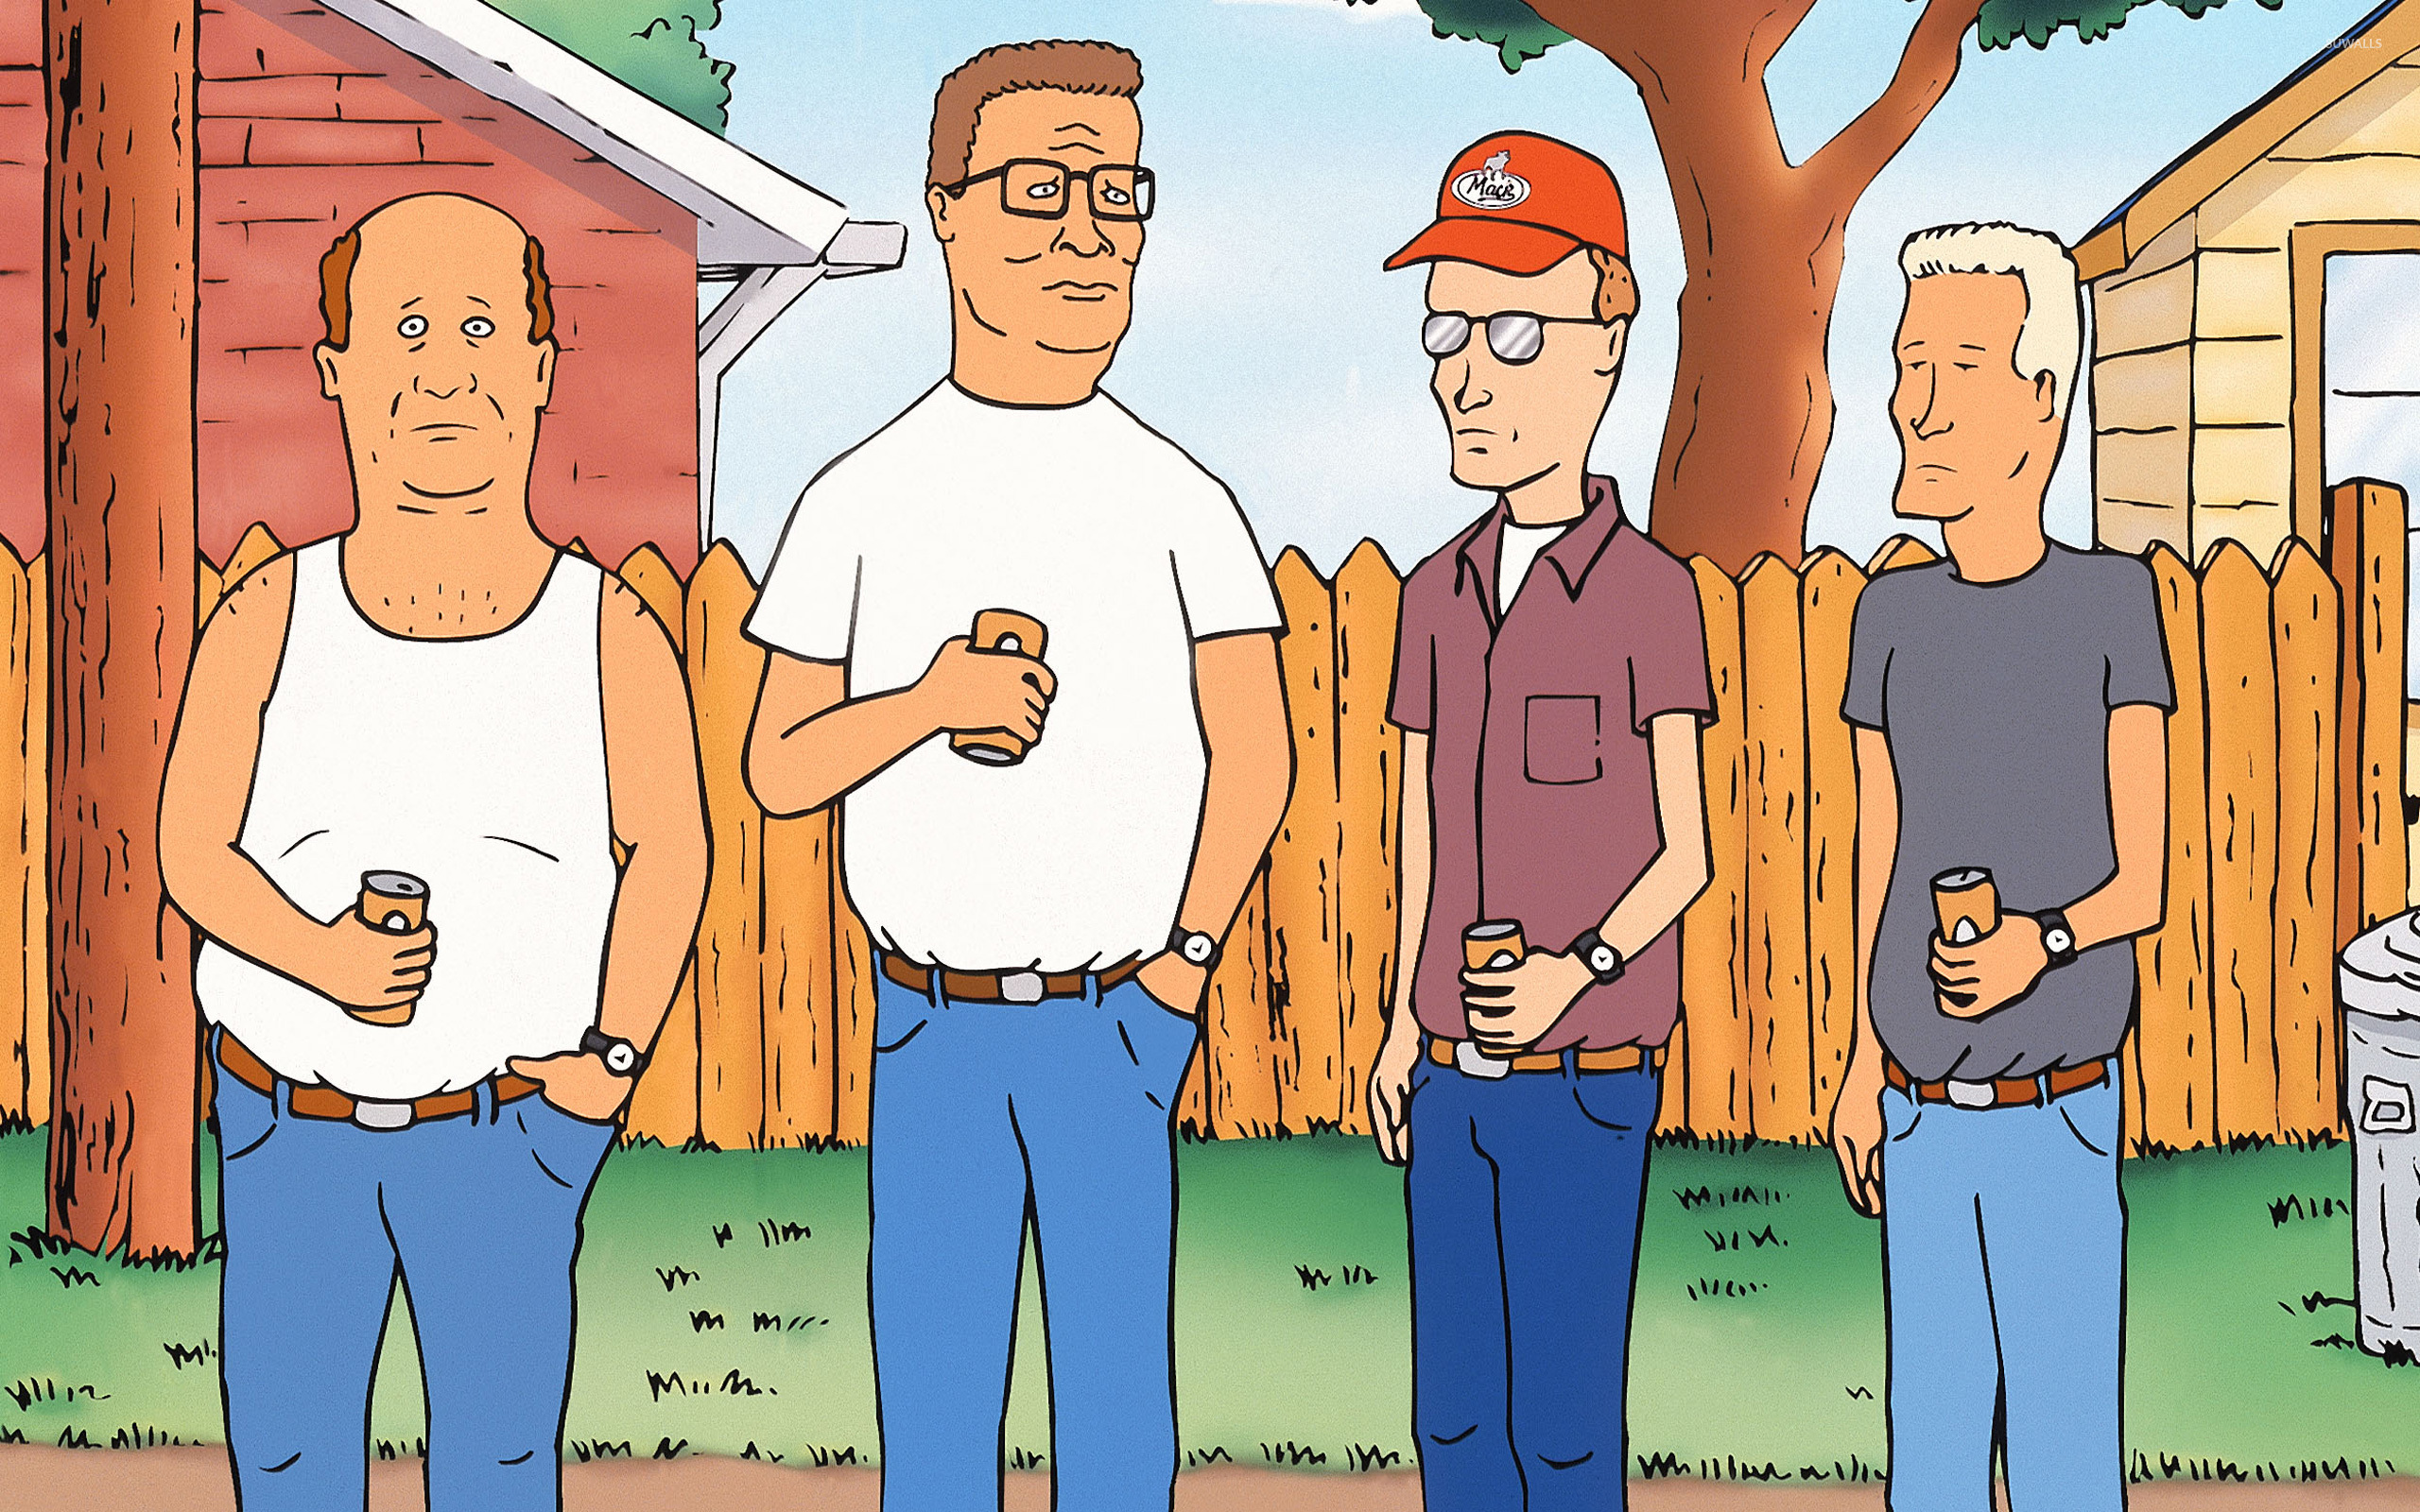 King of the Hill wallpaper 2560x1600.